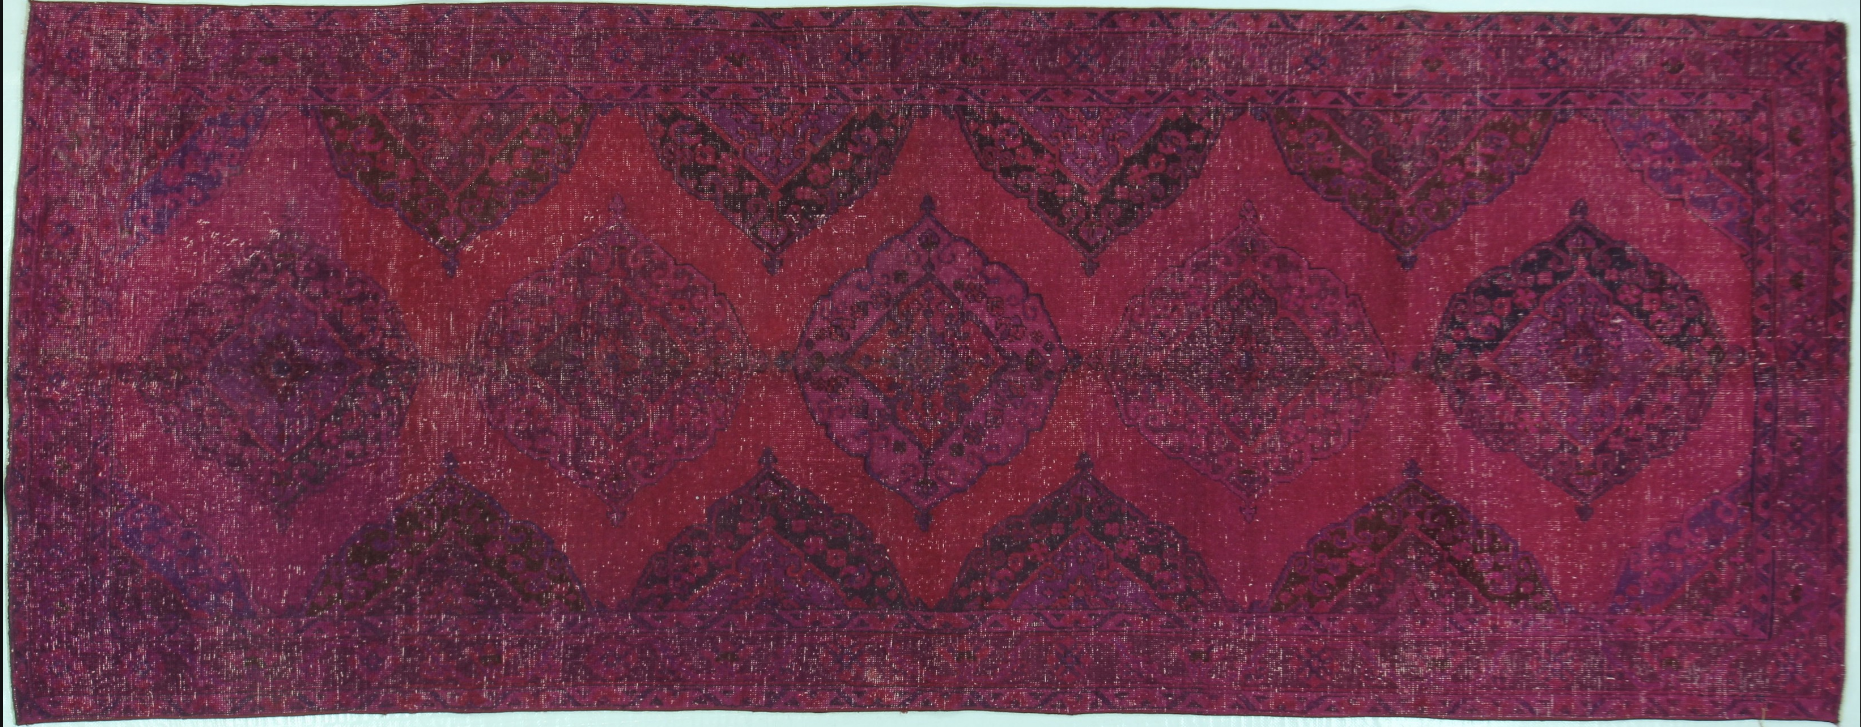 OD7072 PURPLE AND PINK RUNNER 4.8x12.1